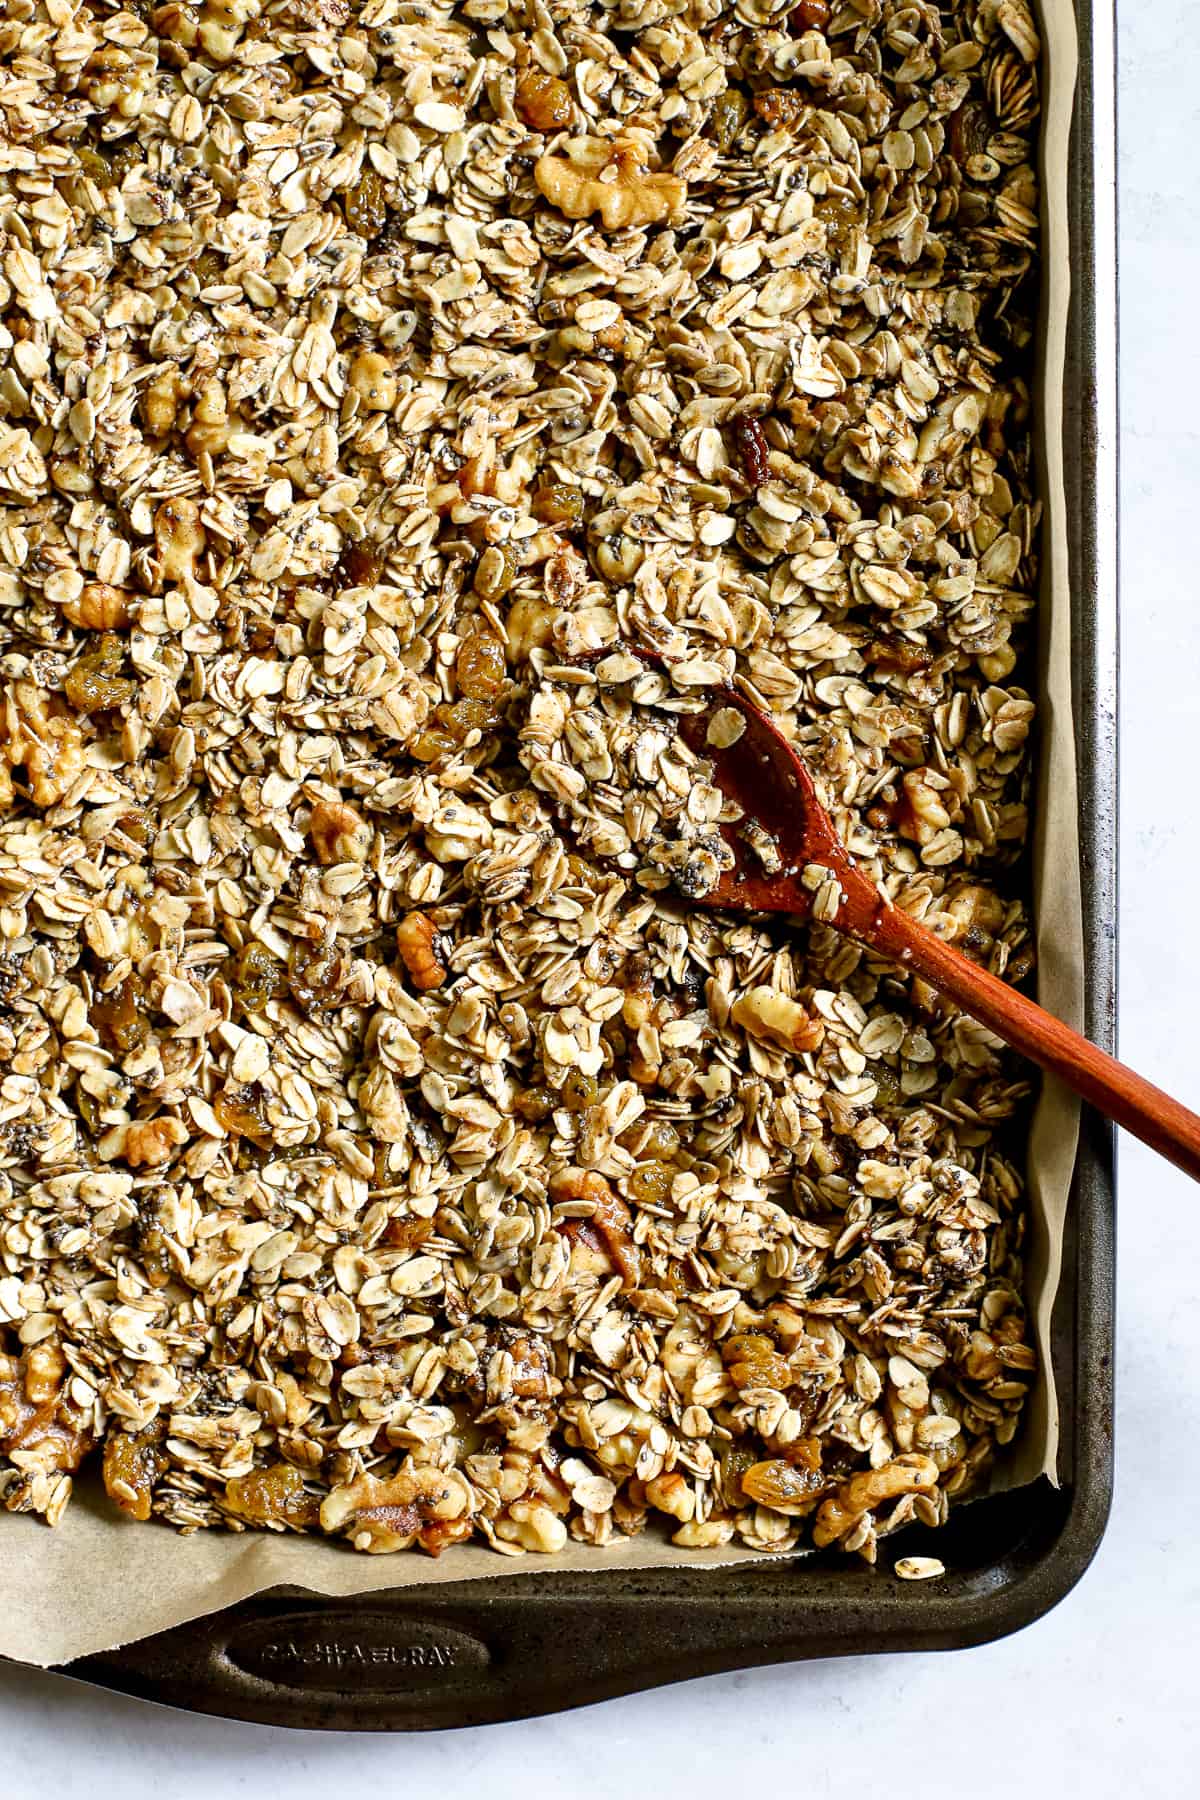 Maple cinnamon walnut granola spread evenly onto parchment-lined cookie sheet with wooden spoon